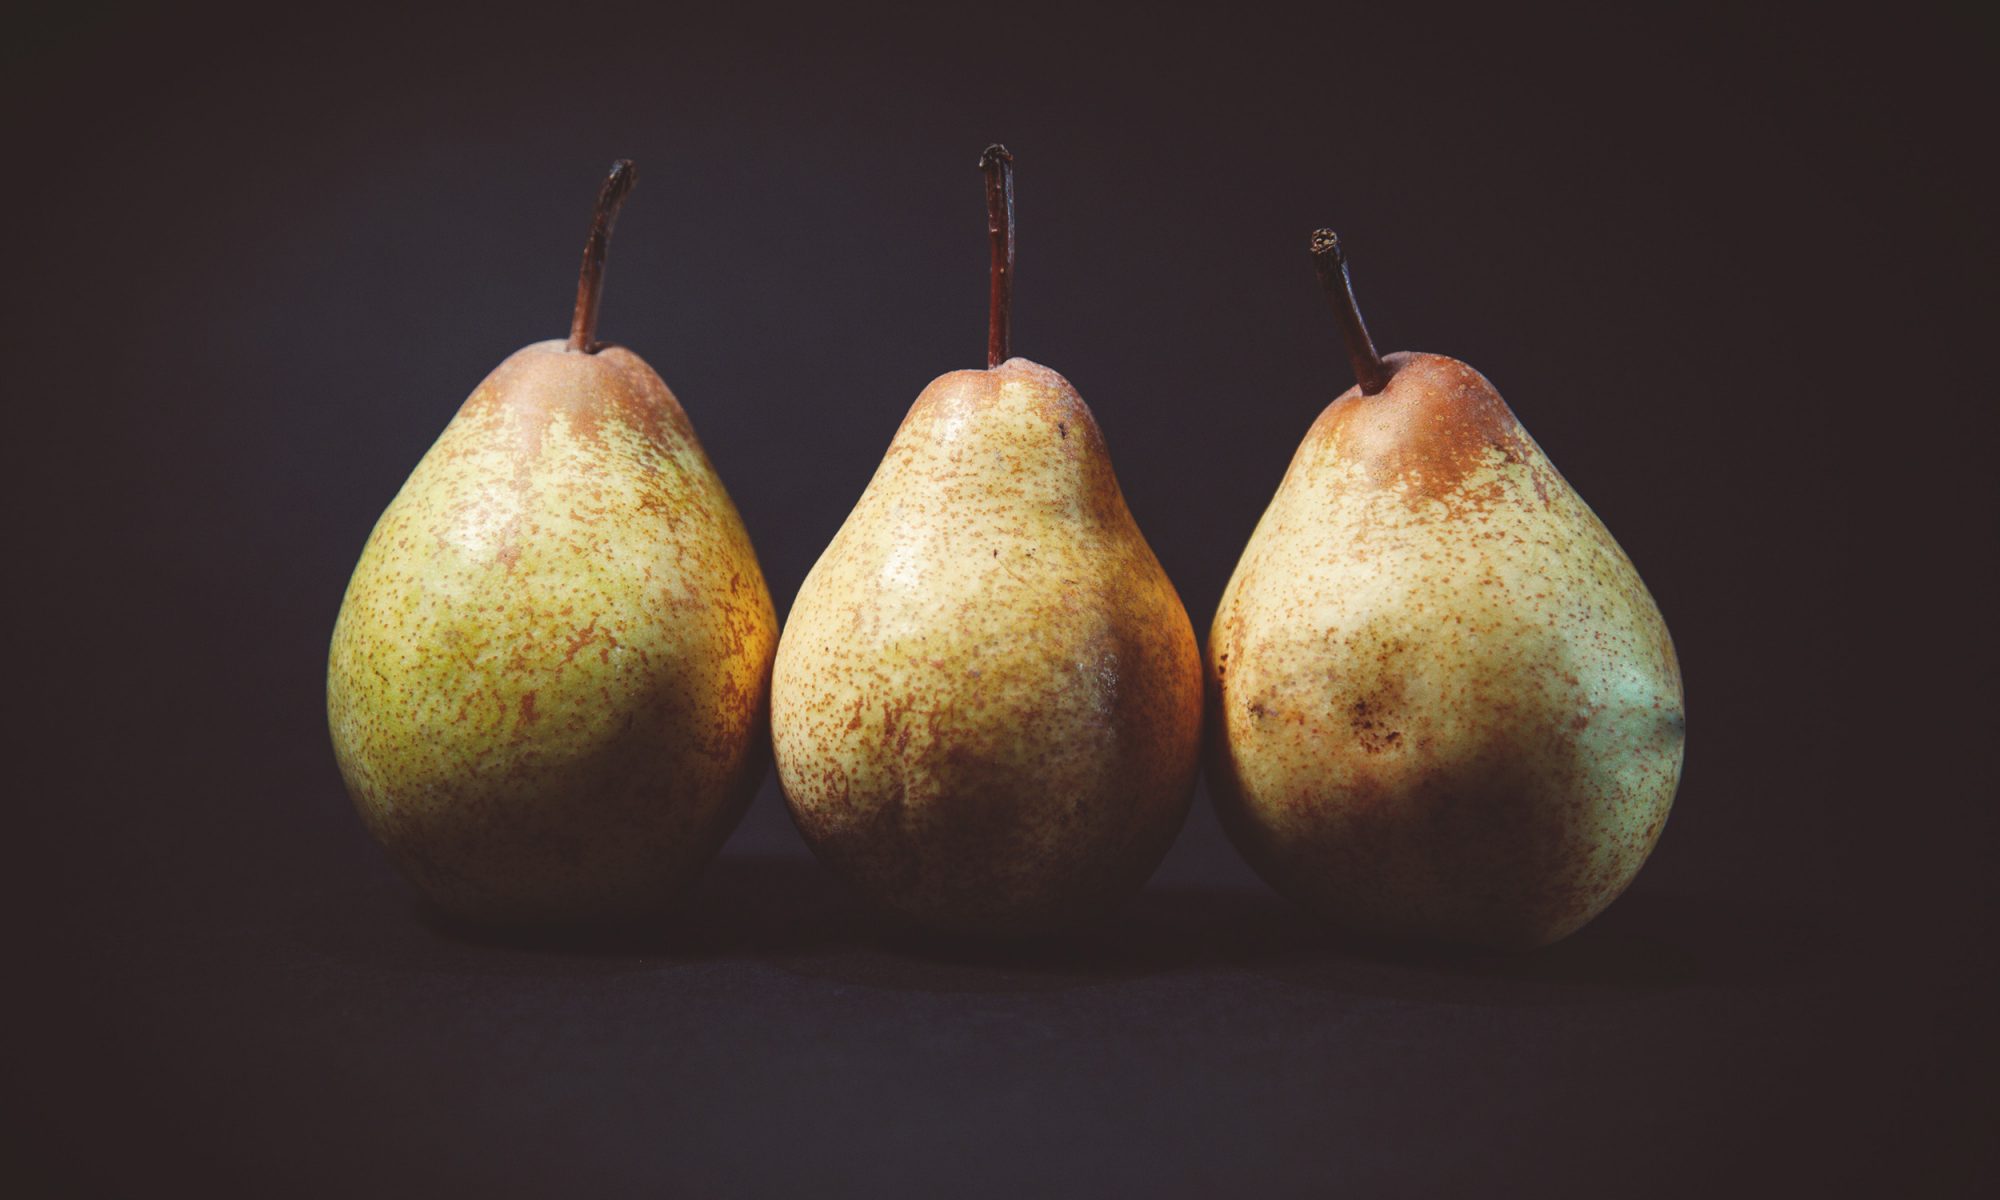 Of Pears and Kings – The Public Domain Review